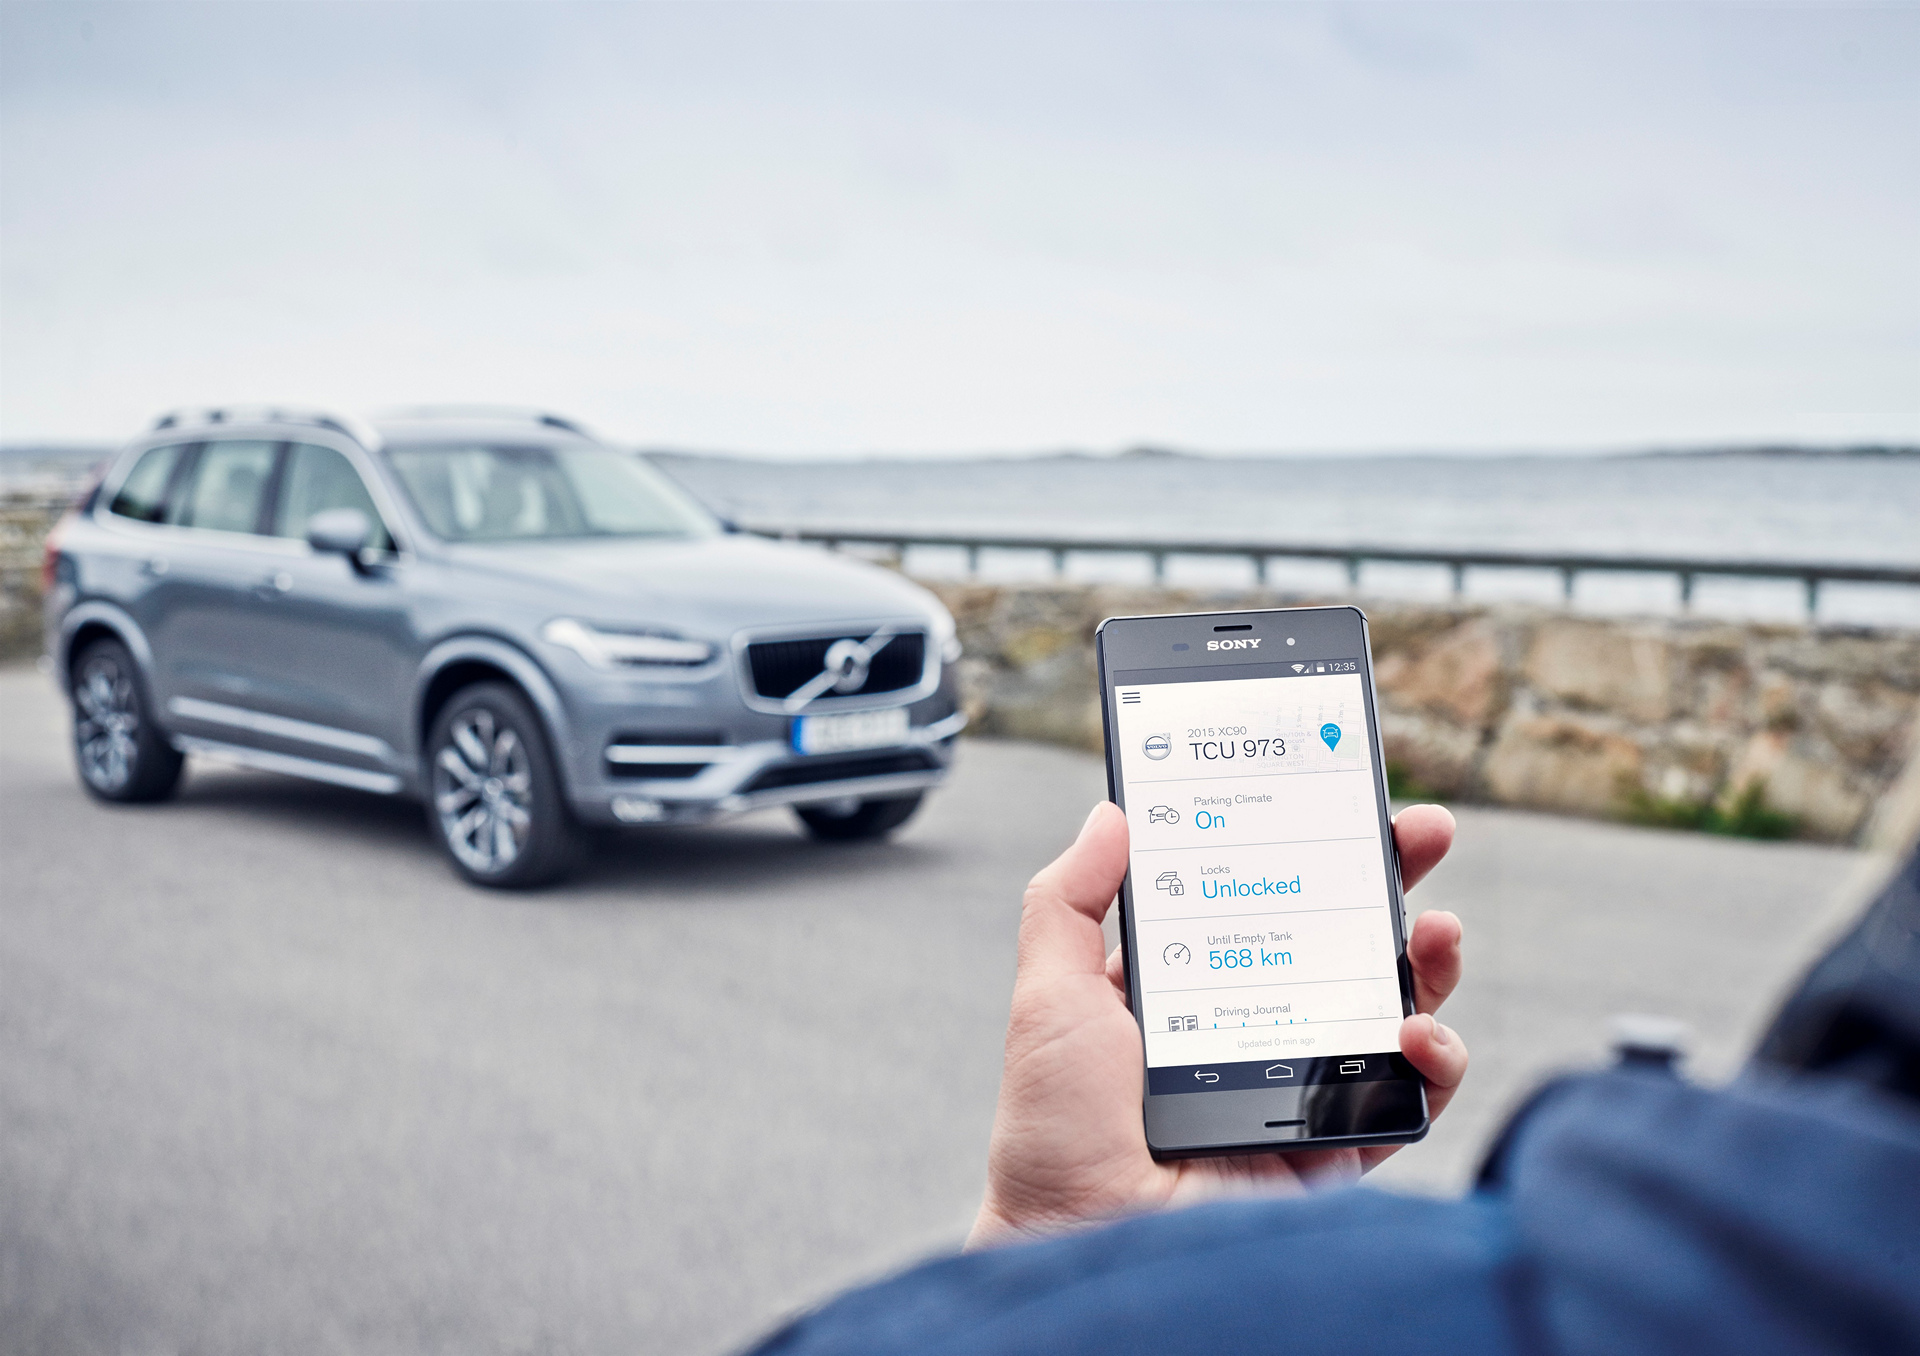 Volvo On Call app © Zhejiang Geely Holding Group Co., Ltd